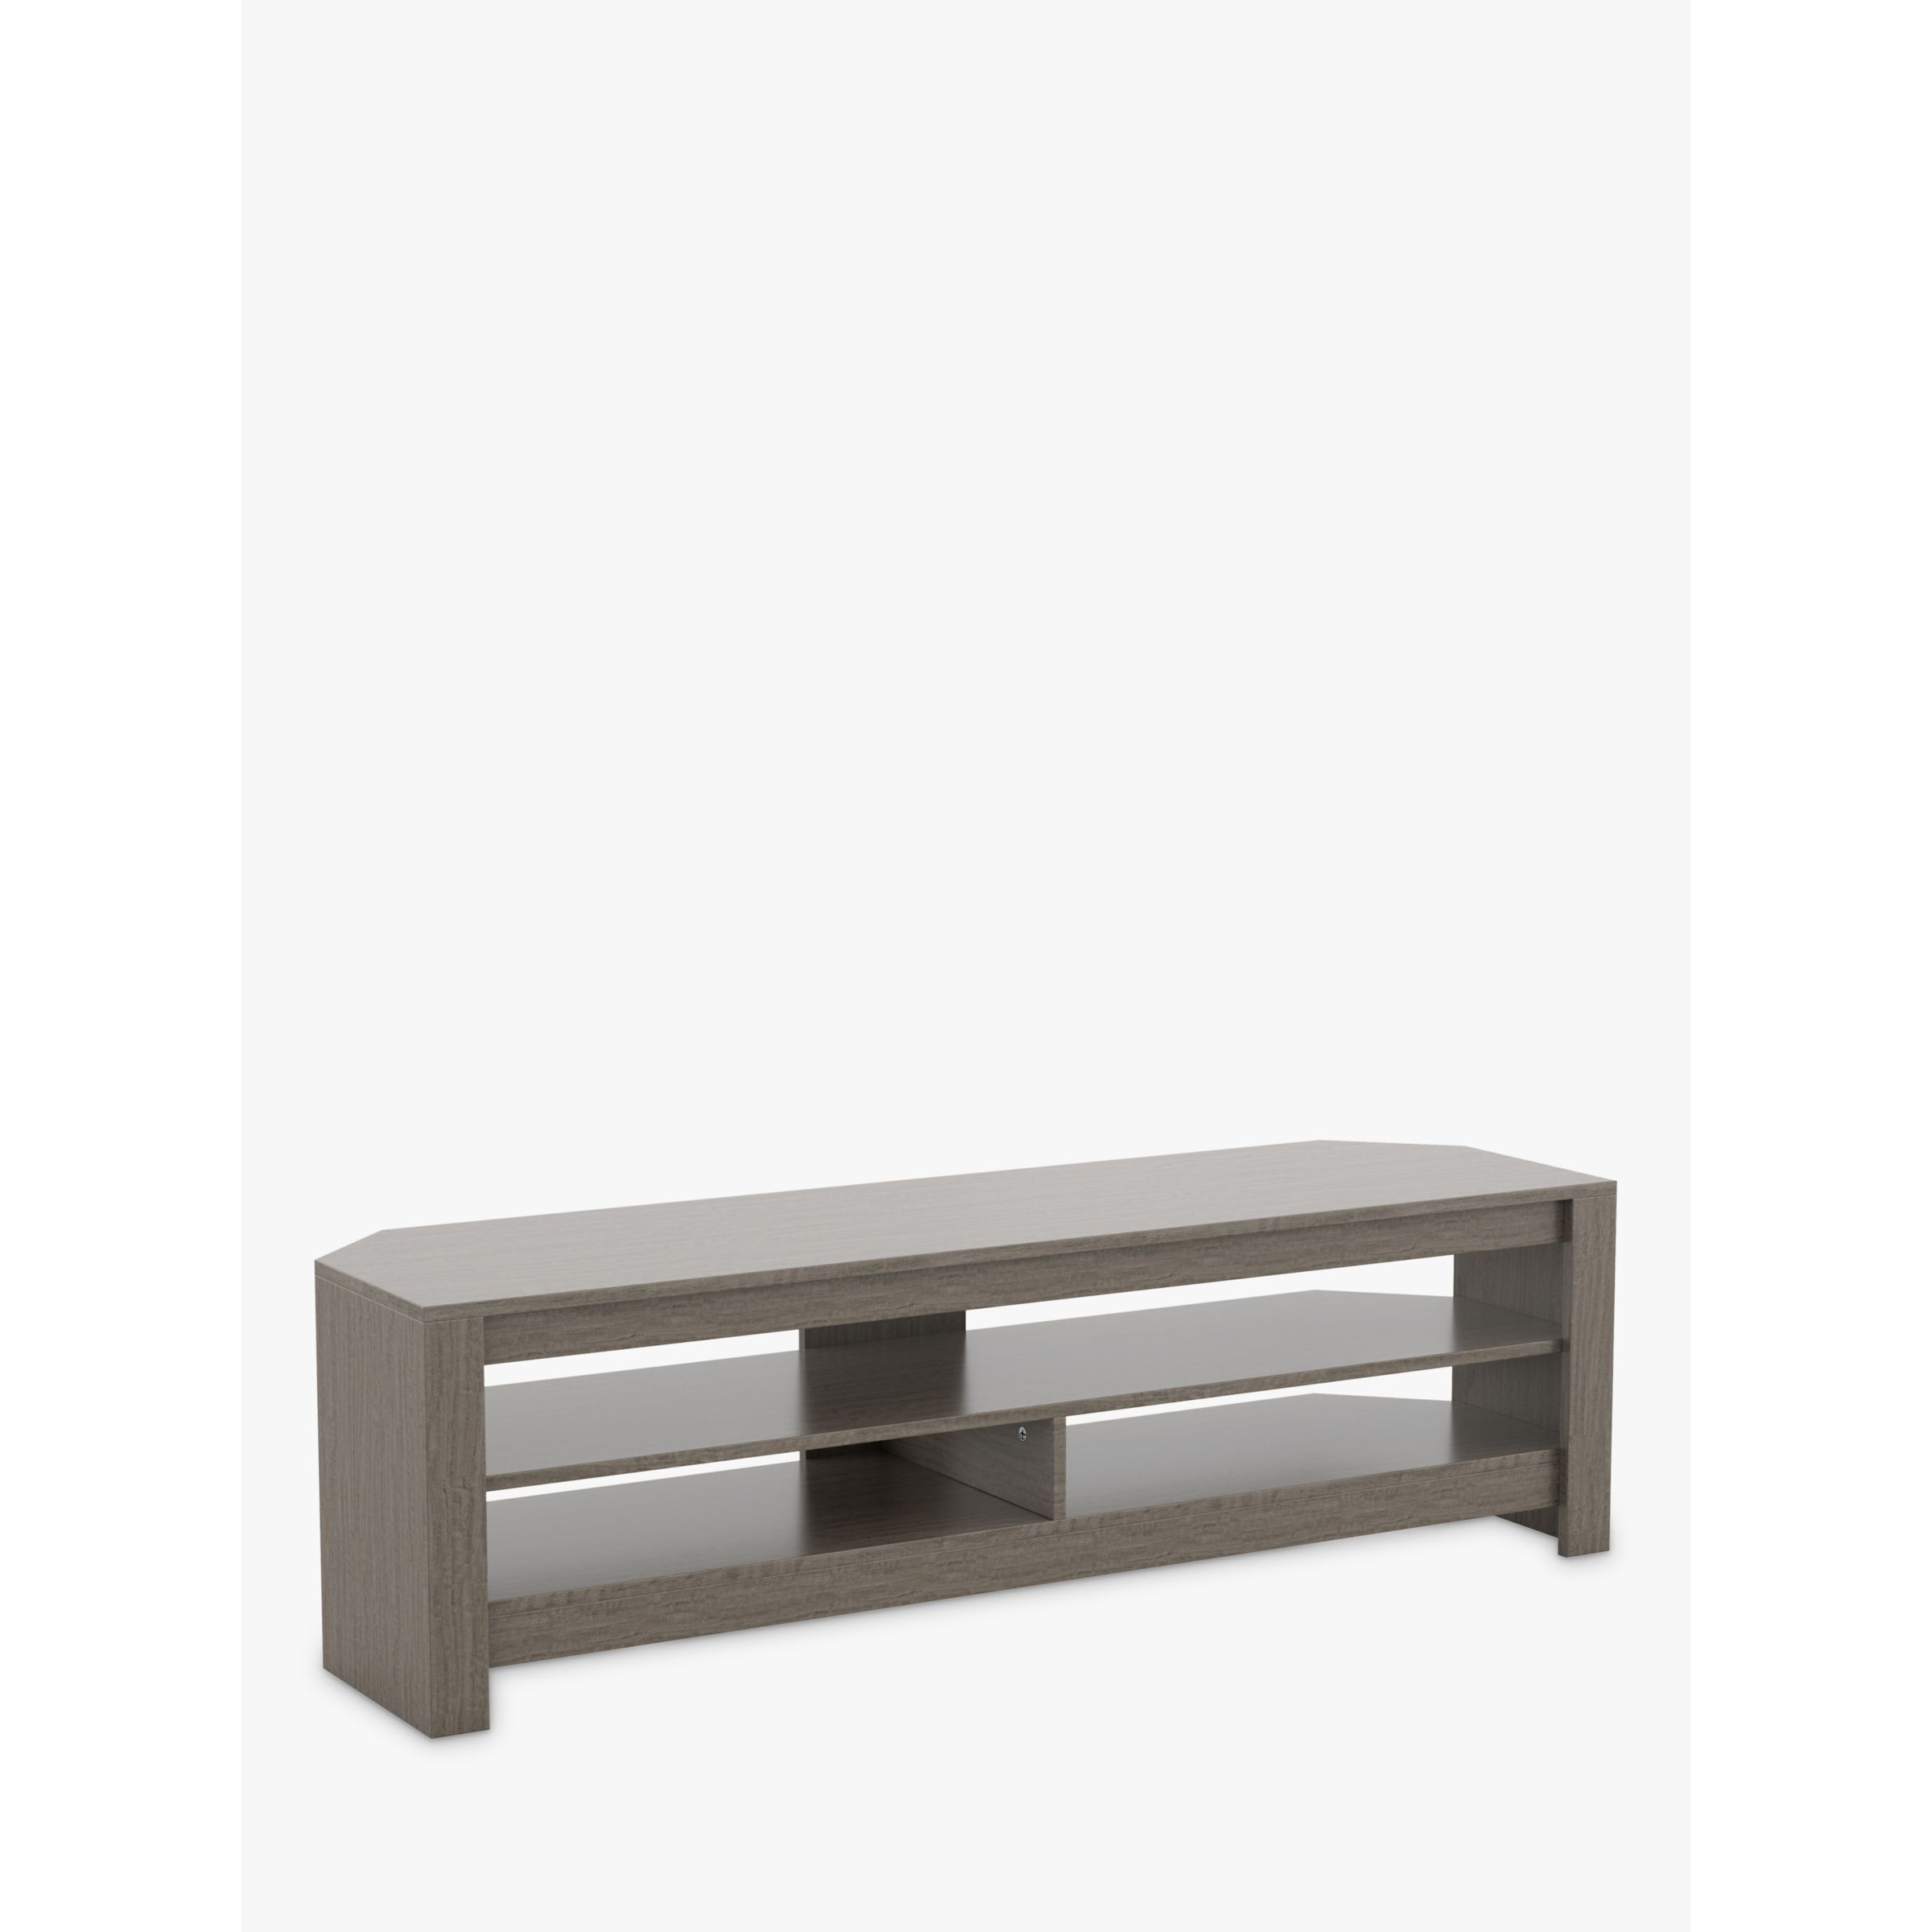 "AVF Calibre 140 TV Stand for TVs up to 65""" - image 1